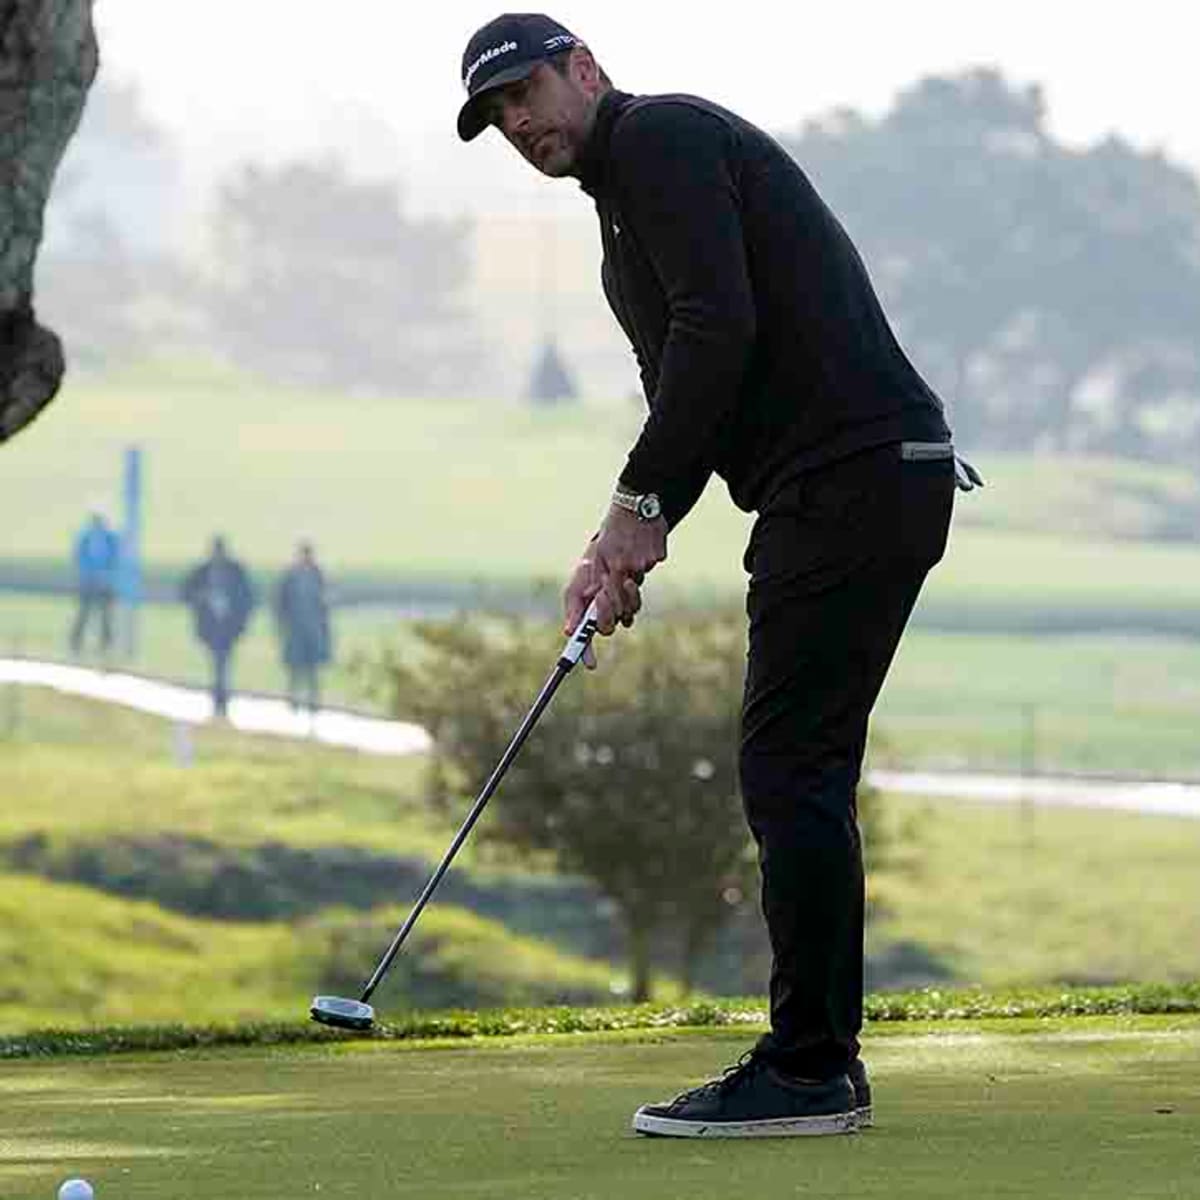 Aaron Rodgers wins a title this year, at the ATandT Pebble Beach Pro-Am